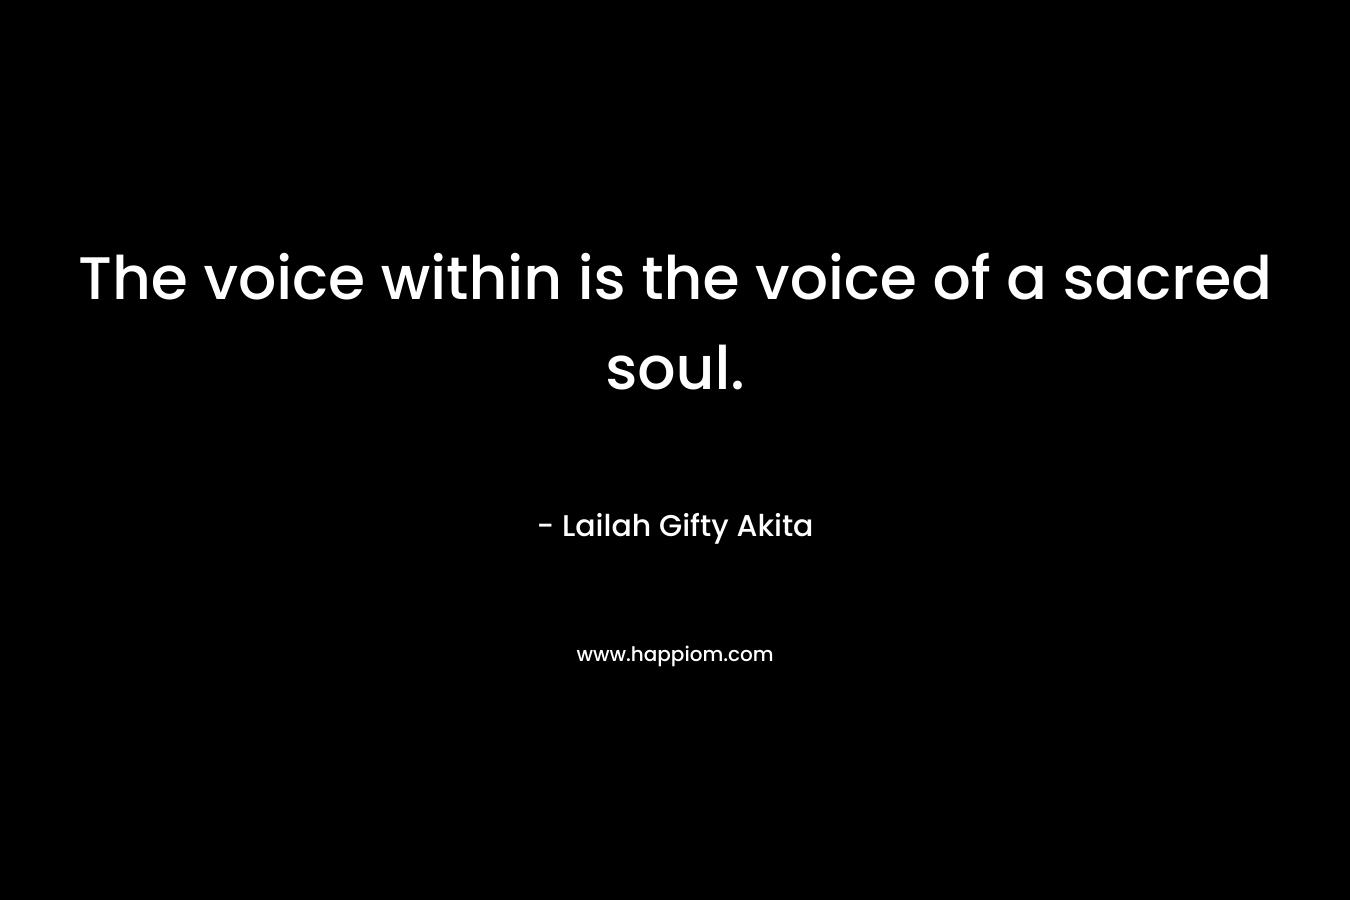 The voice within is the voice of a sacred soul.